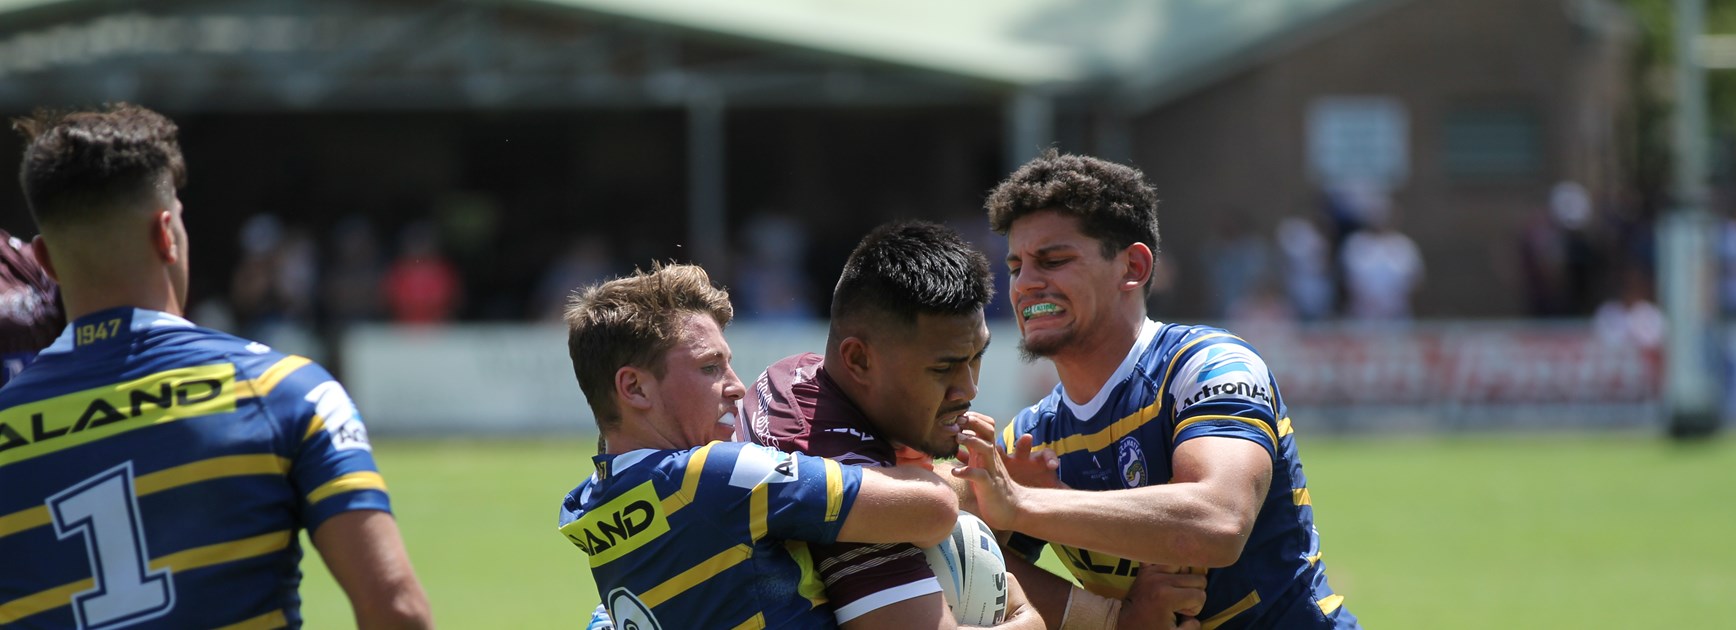 Manly lose 36-6 to Eels in SG Ball Cup